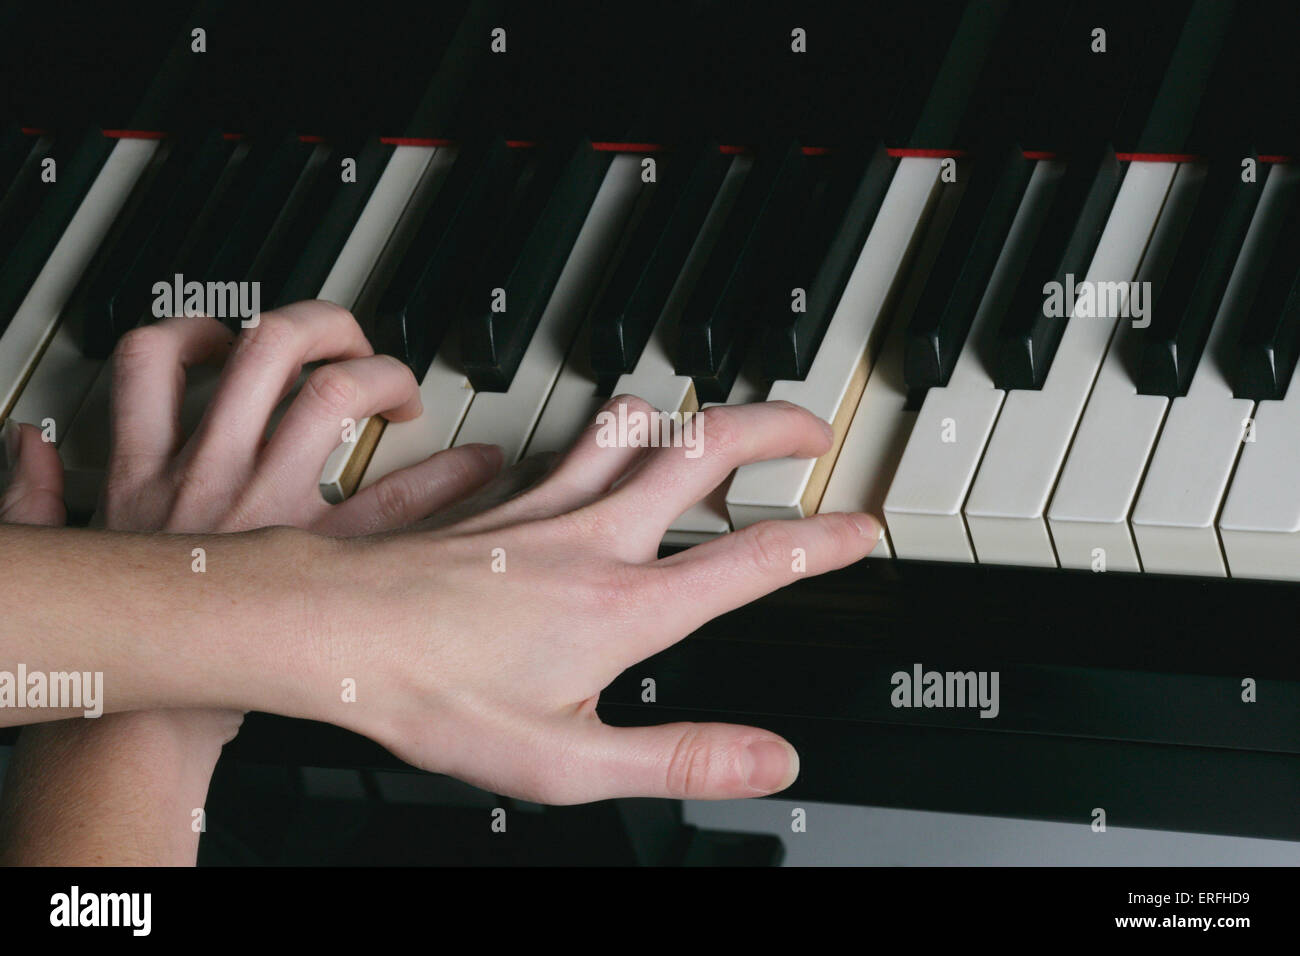 Piano - close-up of a female pianist 's hands crossing while playing. Stock Photo